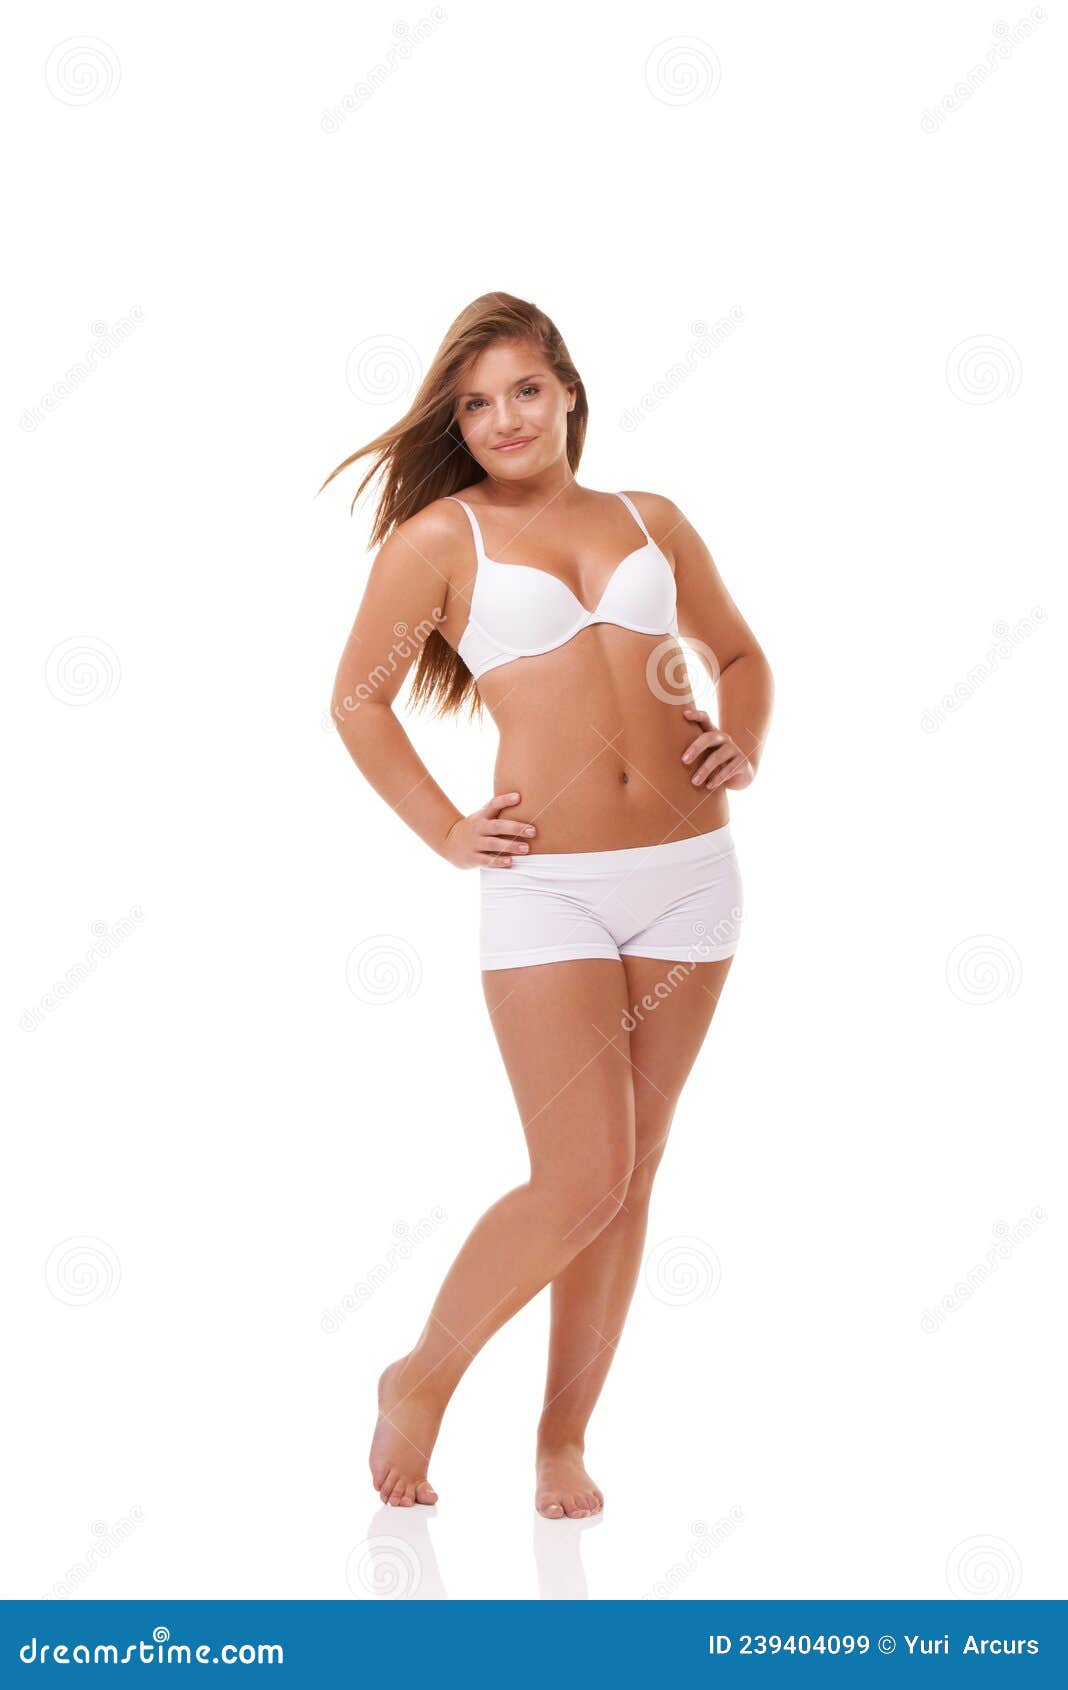 https://thumbs.dreamstime.com/z/gives-sexy-whole-new-meaning-full-length-studio-shot-curvy-young-model-underwear-white-239404099.jpg